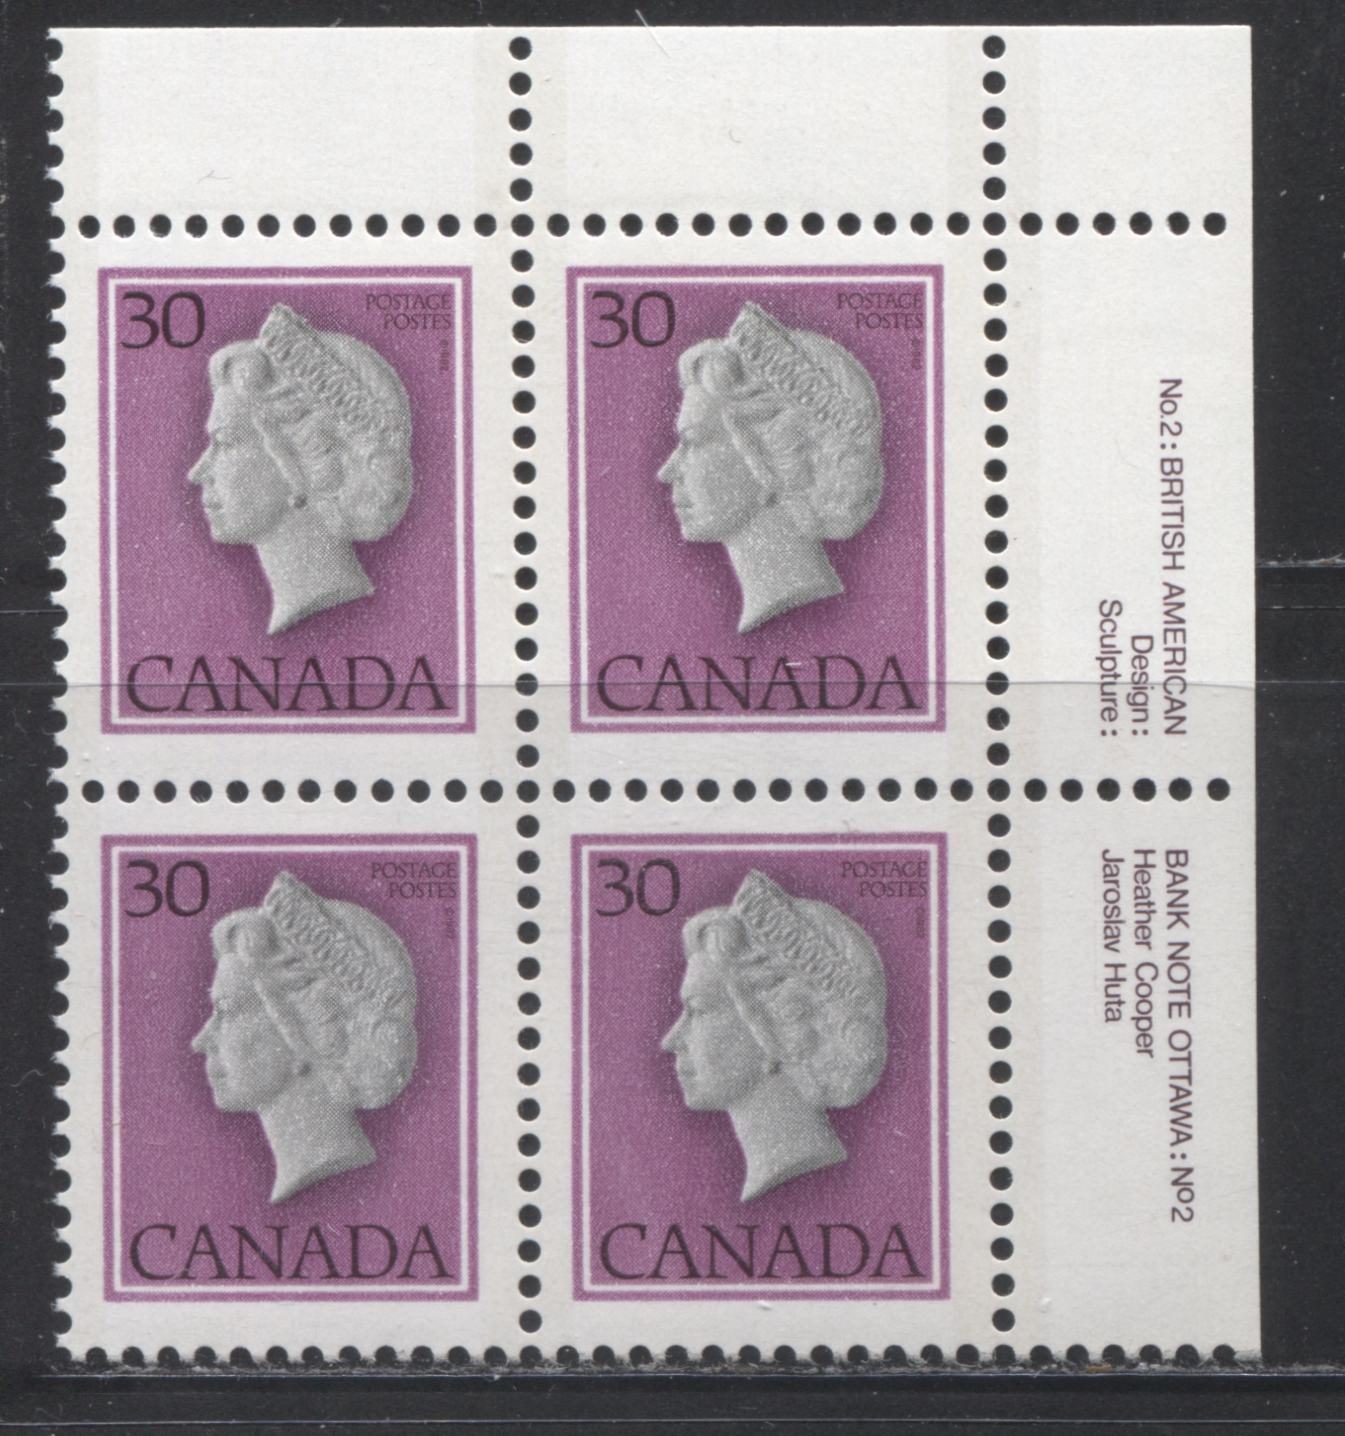 Canada #791iv 30c Deep Magenta And Black Queen Elizabeth II, 1977-1982 Floral & Environment Issue, A VFNH UR Plate 2 Inscription Block On DF/DF-fl Paper With A Solid Background